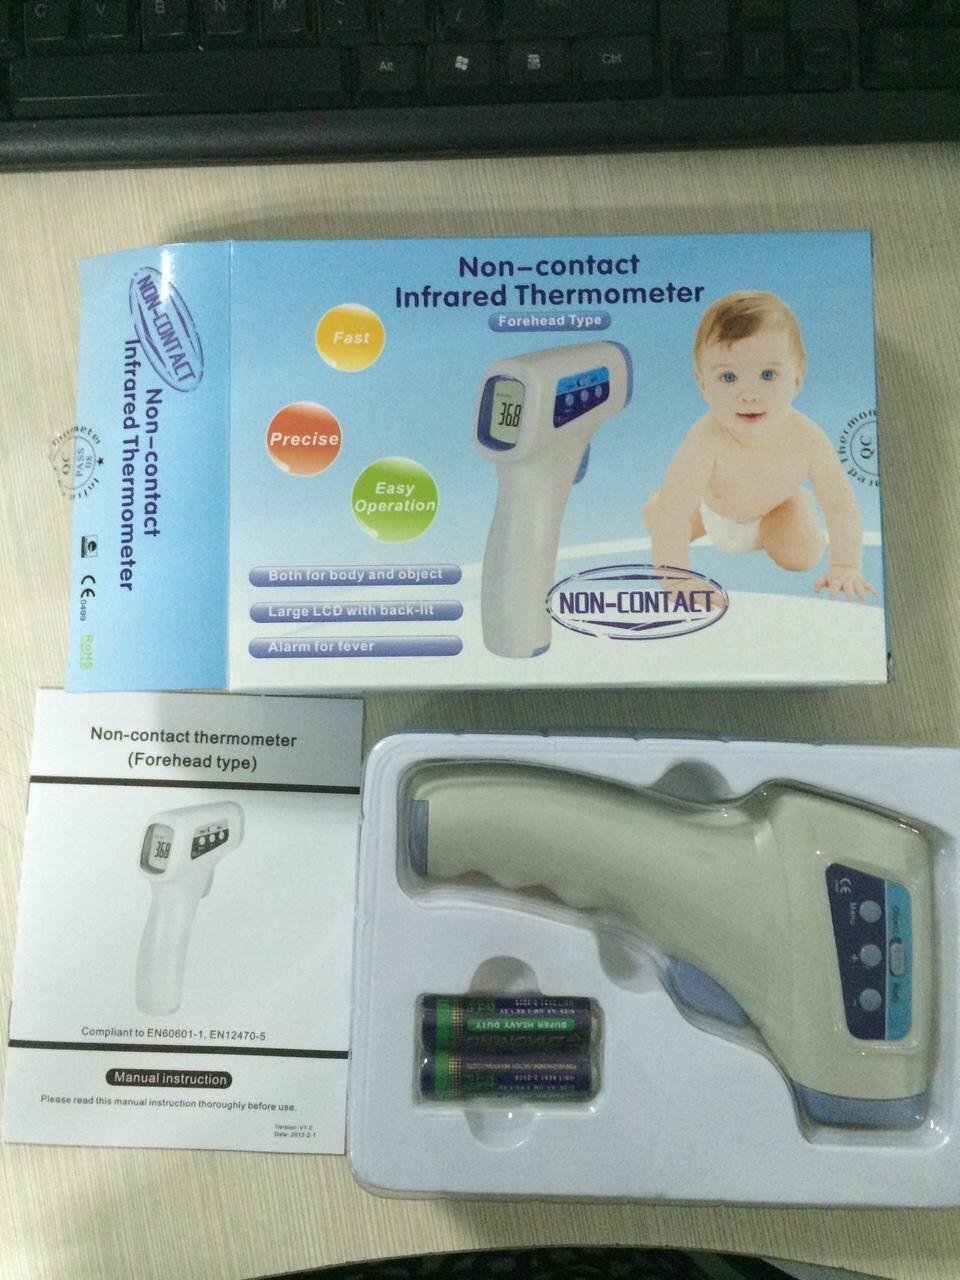 Best Selling Non Contact Infrared Forehead Thermometer with CE Marked 2